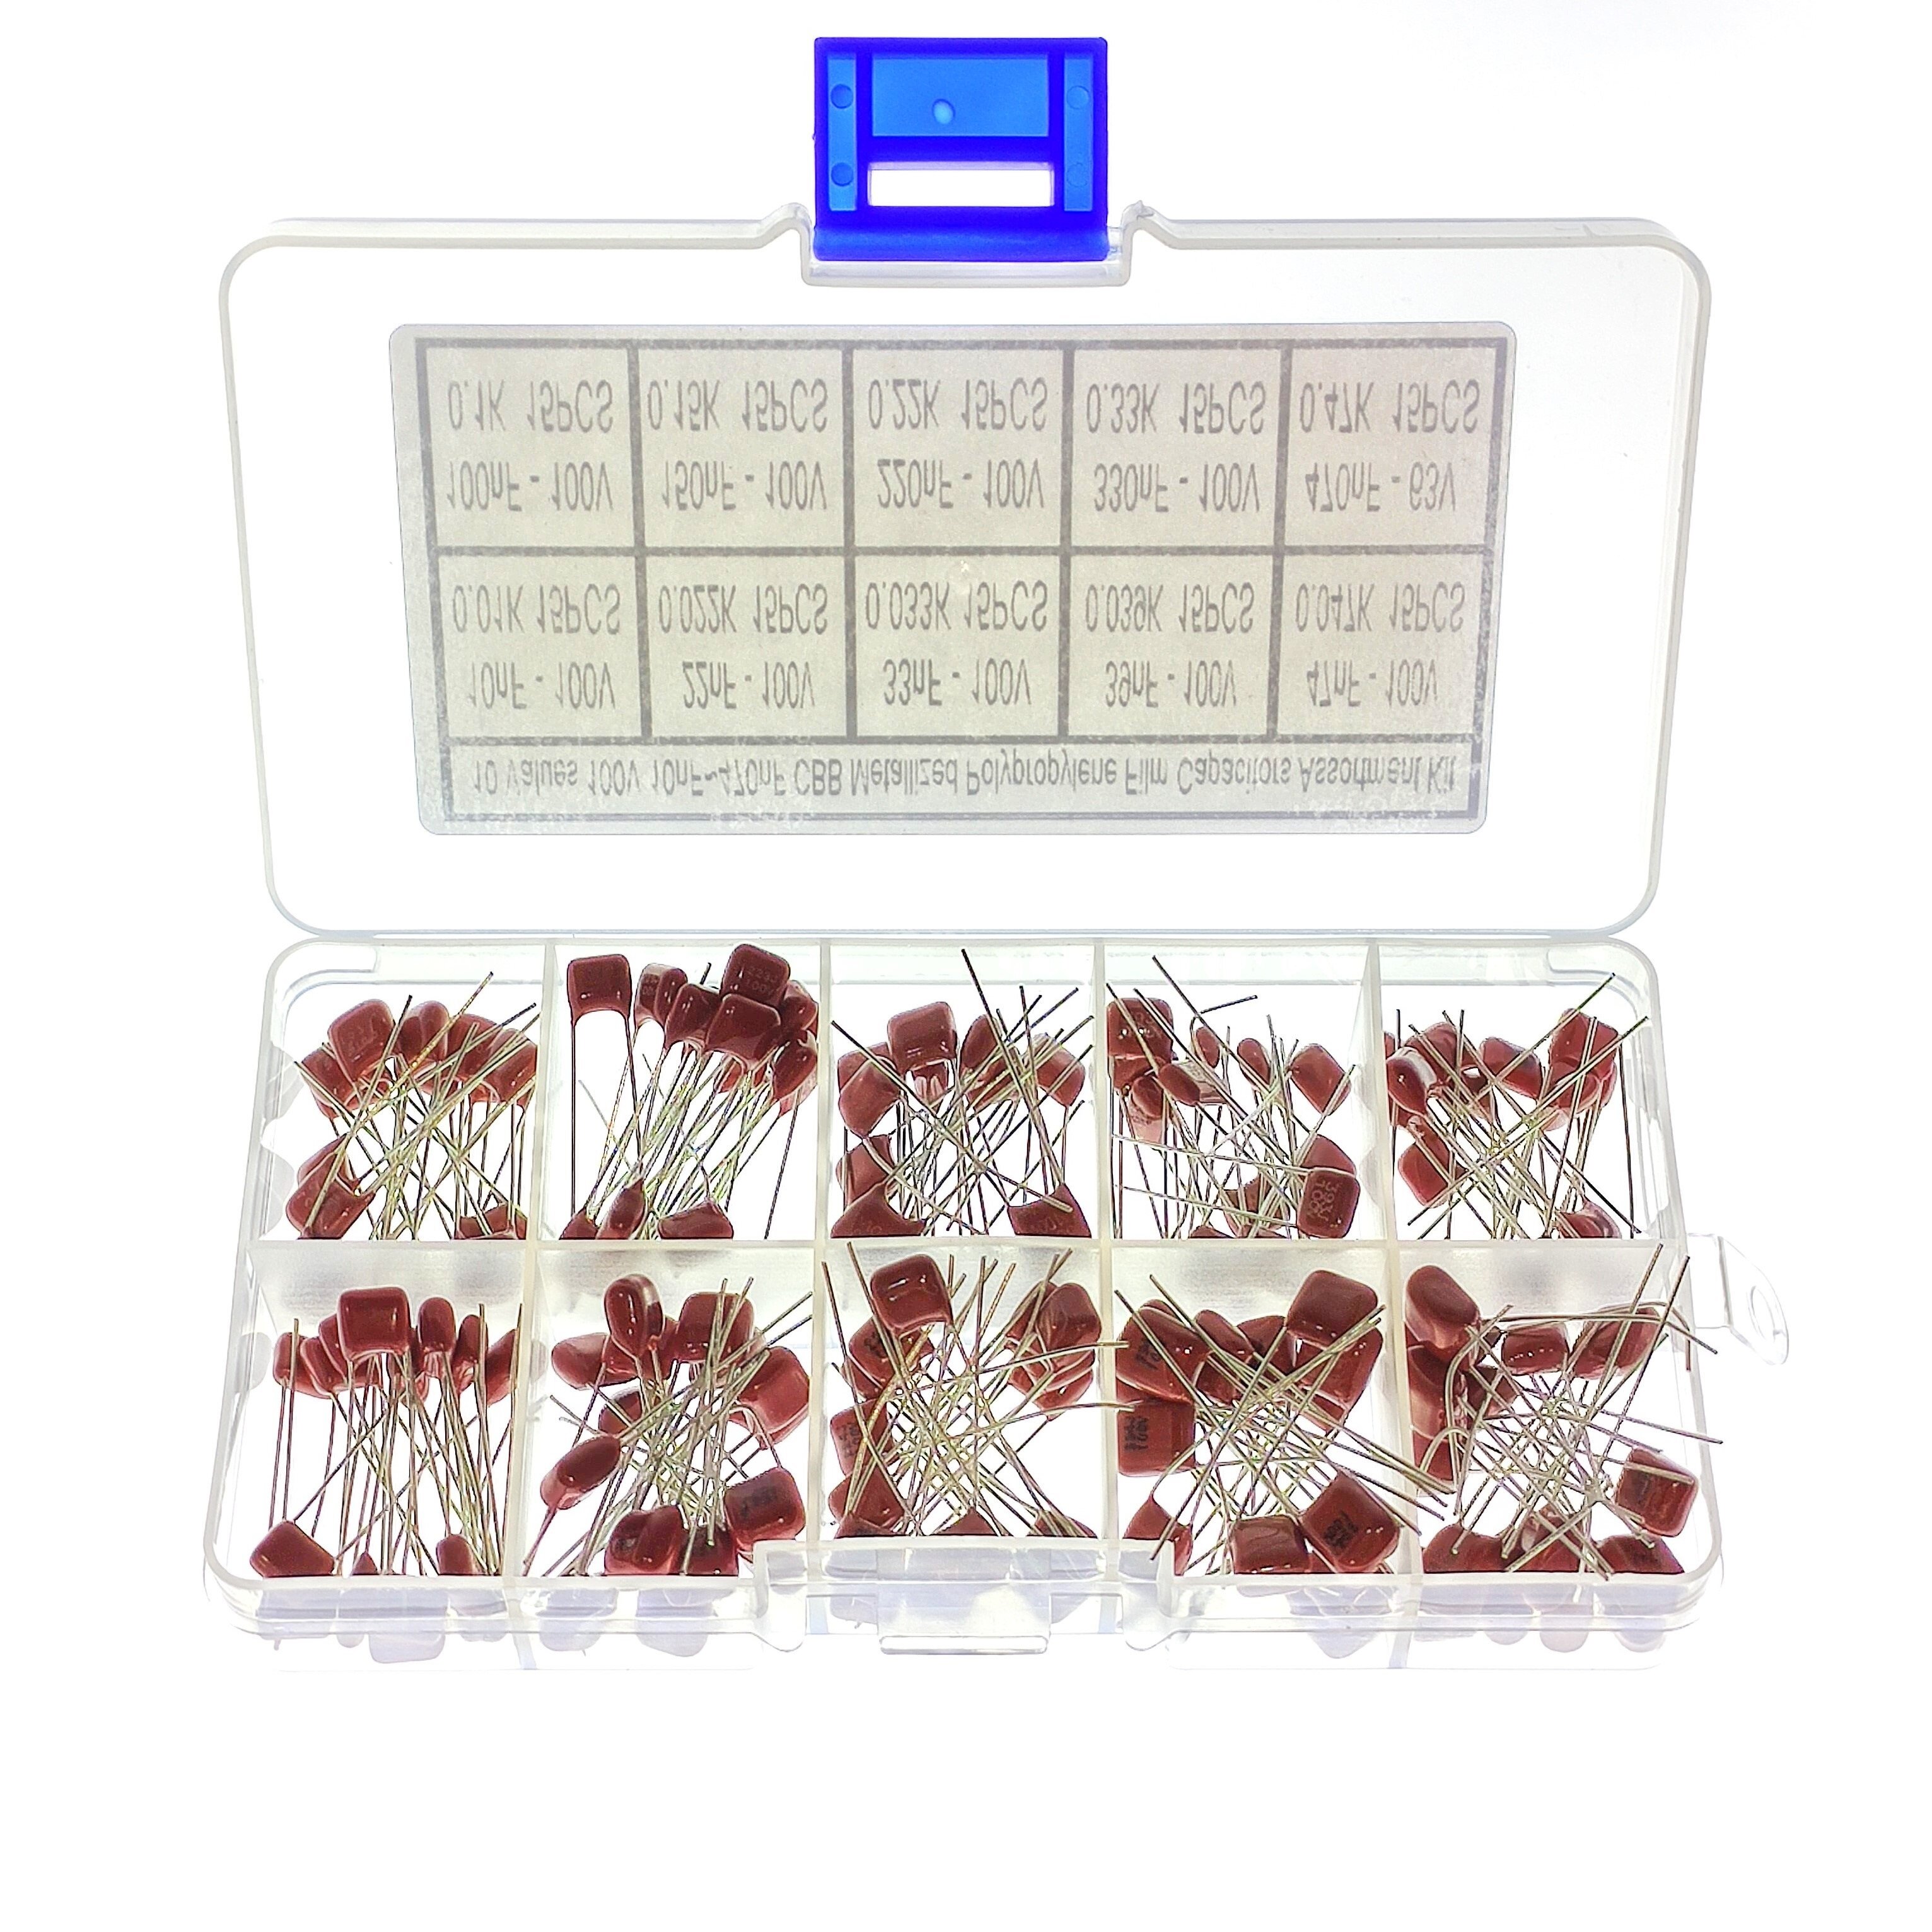 

150pcs 15 Values CBB Capacitor Set Metallized Polyester Film Capacitors Assortment Kit 10nF~470nF 22NF 47NF 100NF 0.47uf